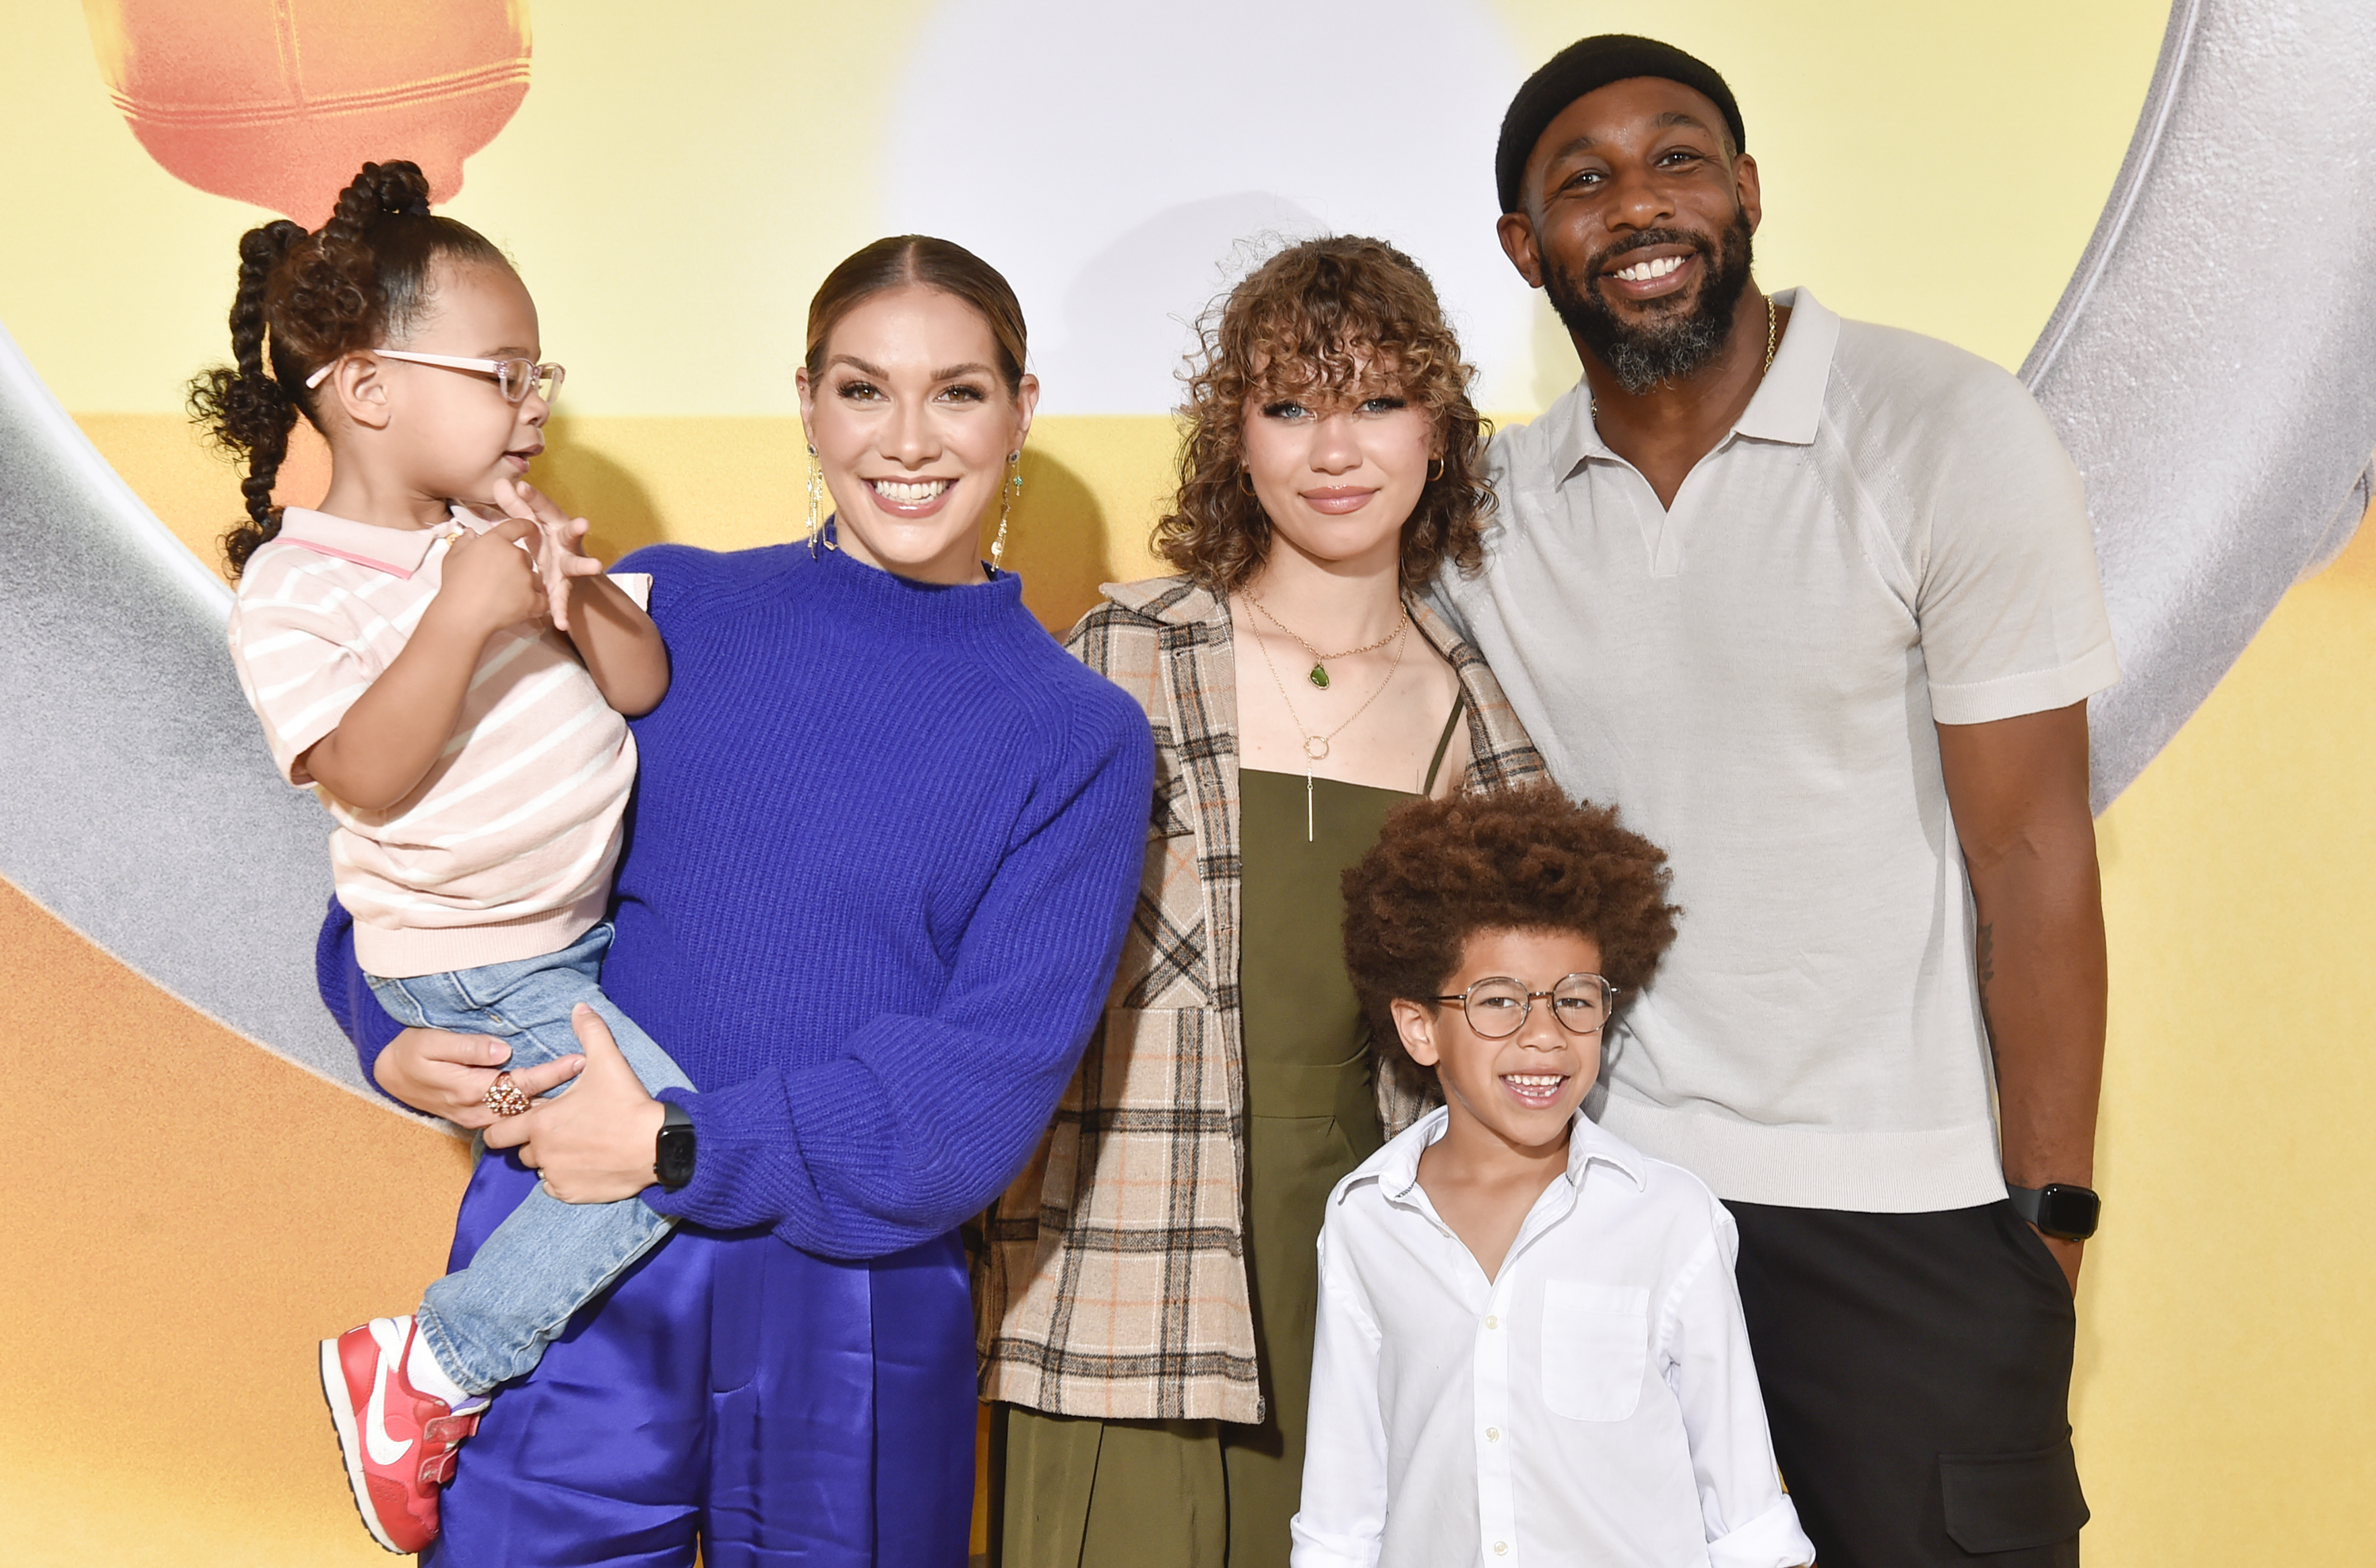 Allison Holker and Stephen 'tWitch' Boss with their children Zaia, Weslie, and Maddox at the Los Angeles premiere of "Minions: The Rise of Gru" on June 25, 2022, in Hollywood, California | Source: Getty Images